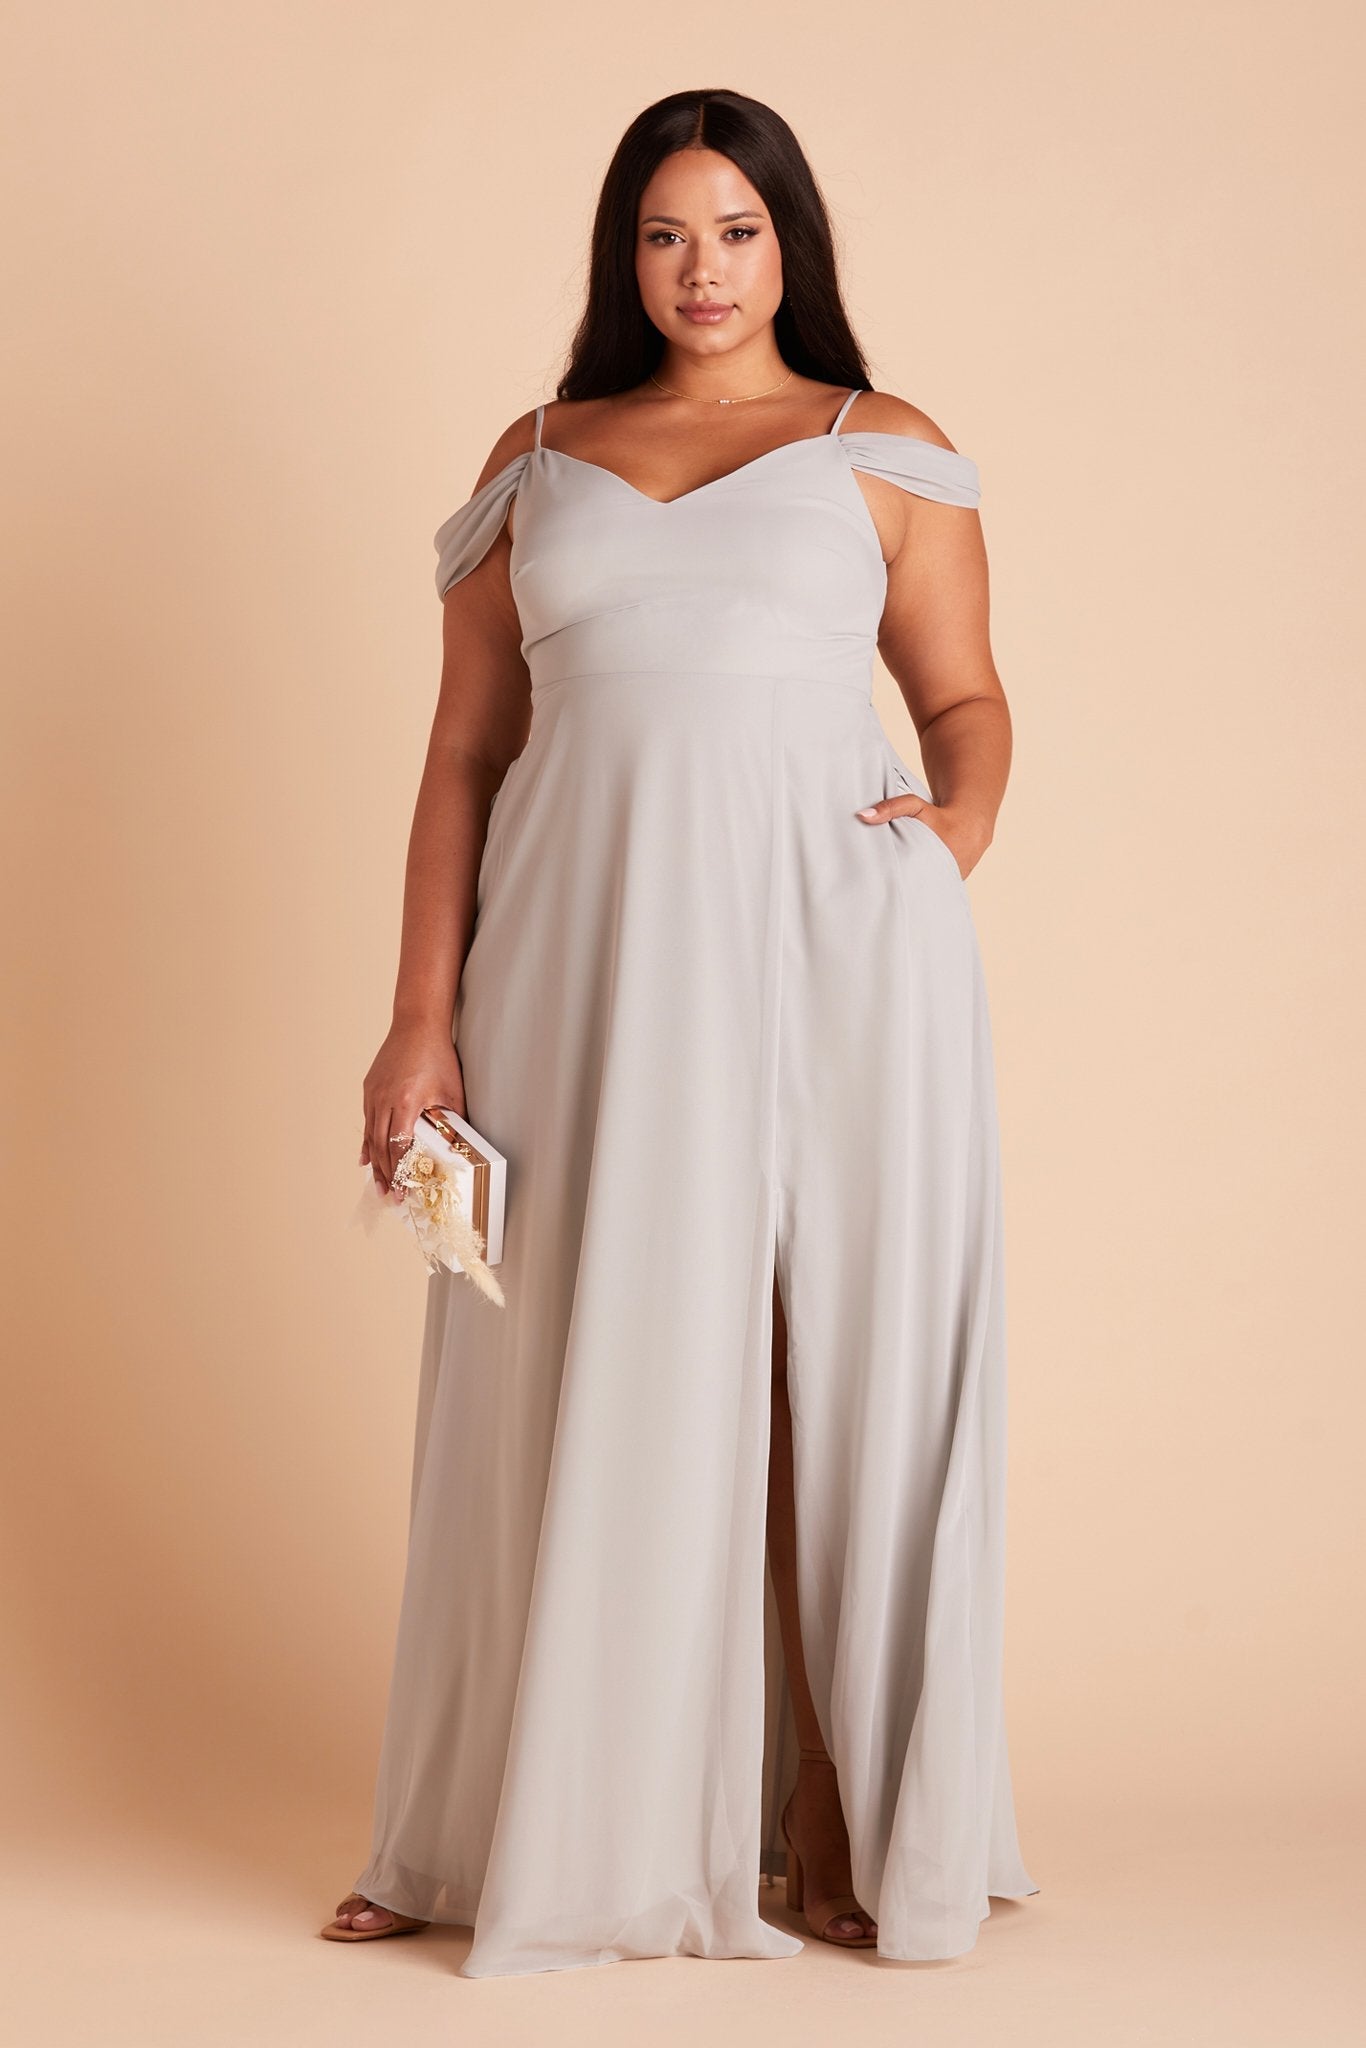 Devin convertible plus size bridesmaid dress with slit in dove gray chiffon by Birdy Grey, front view with hand in pocket